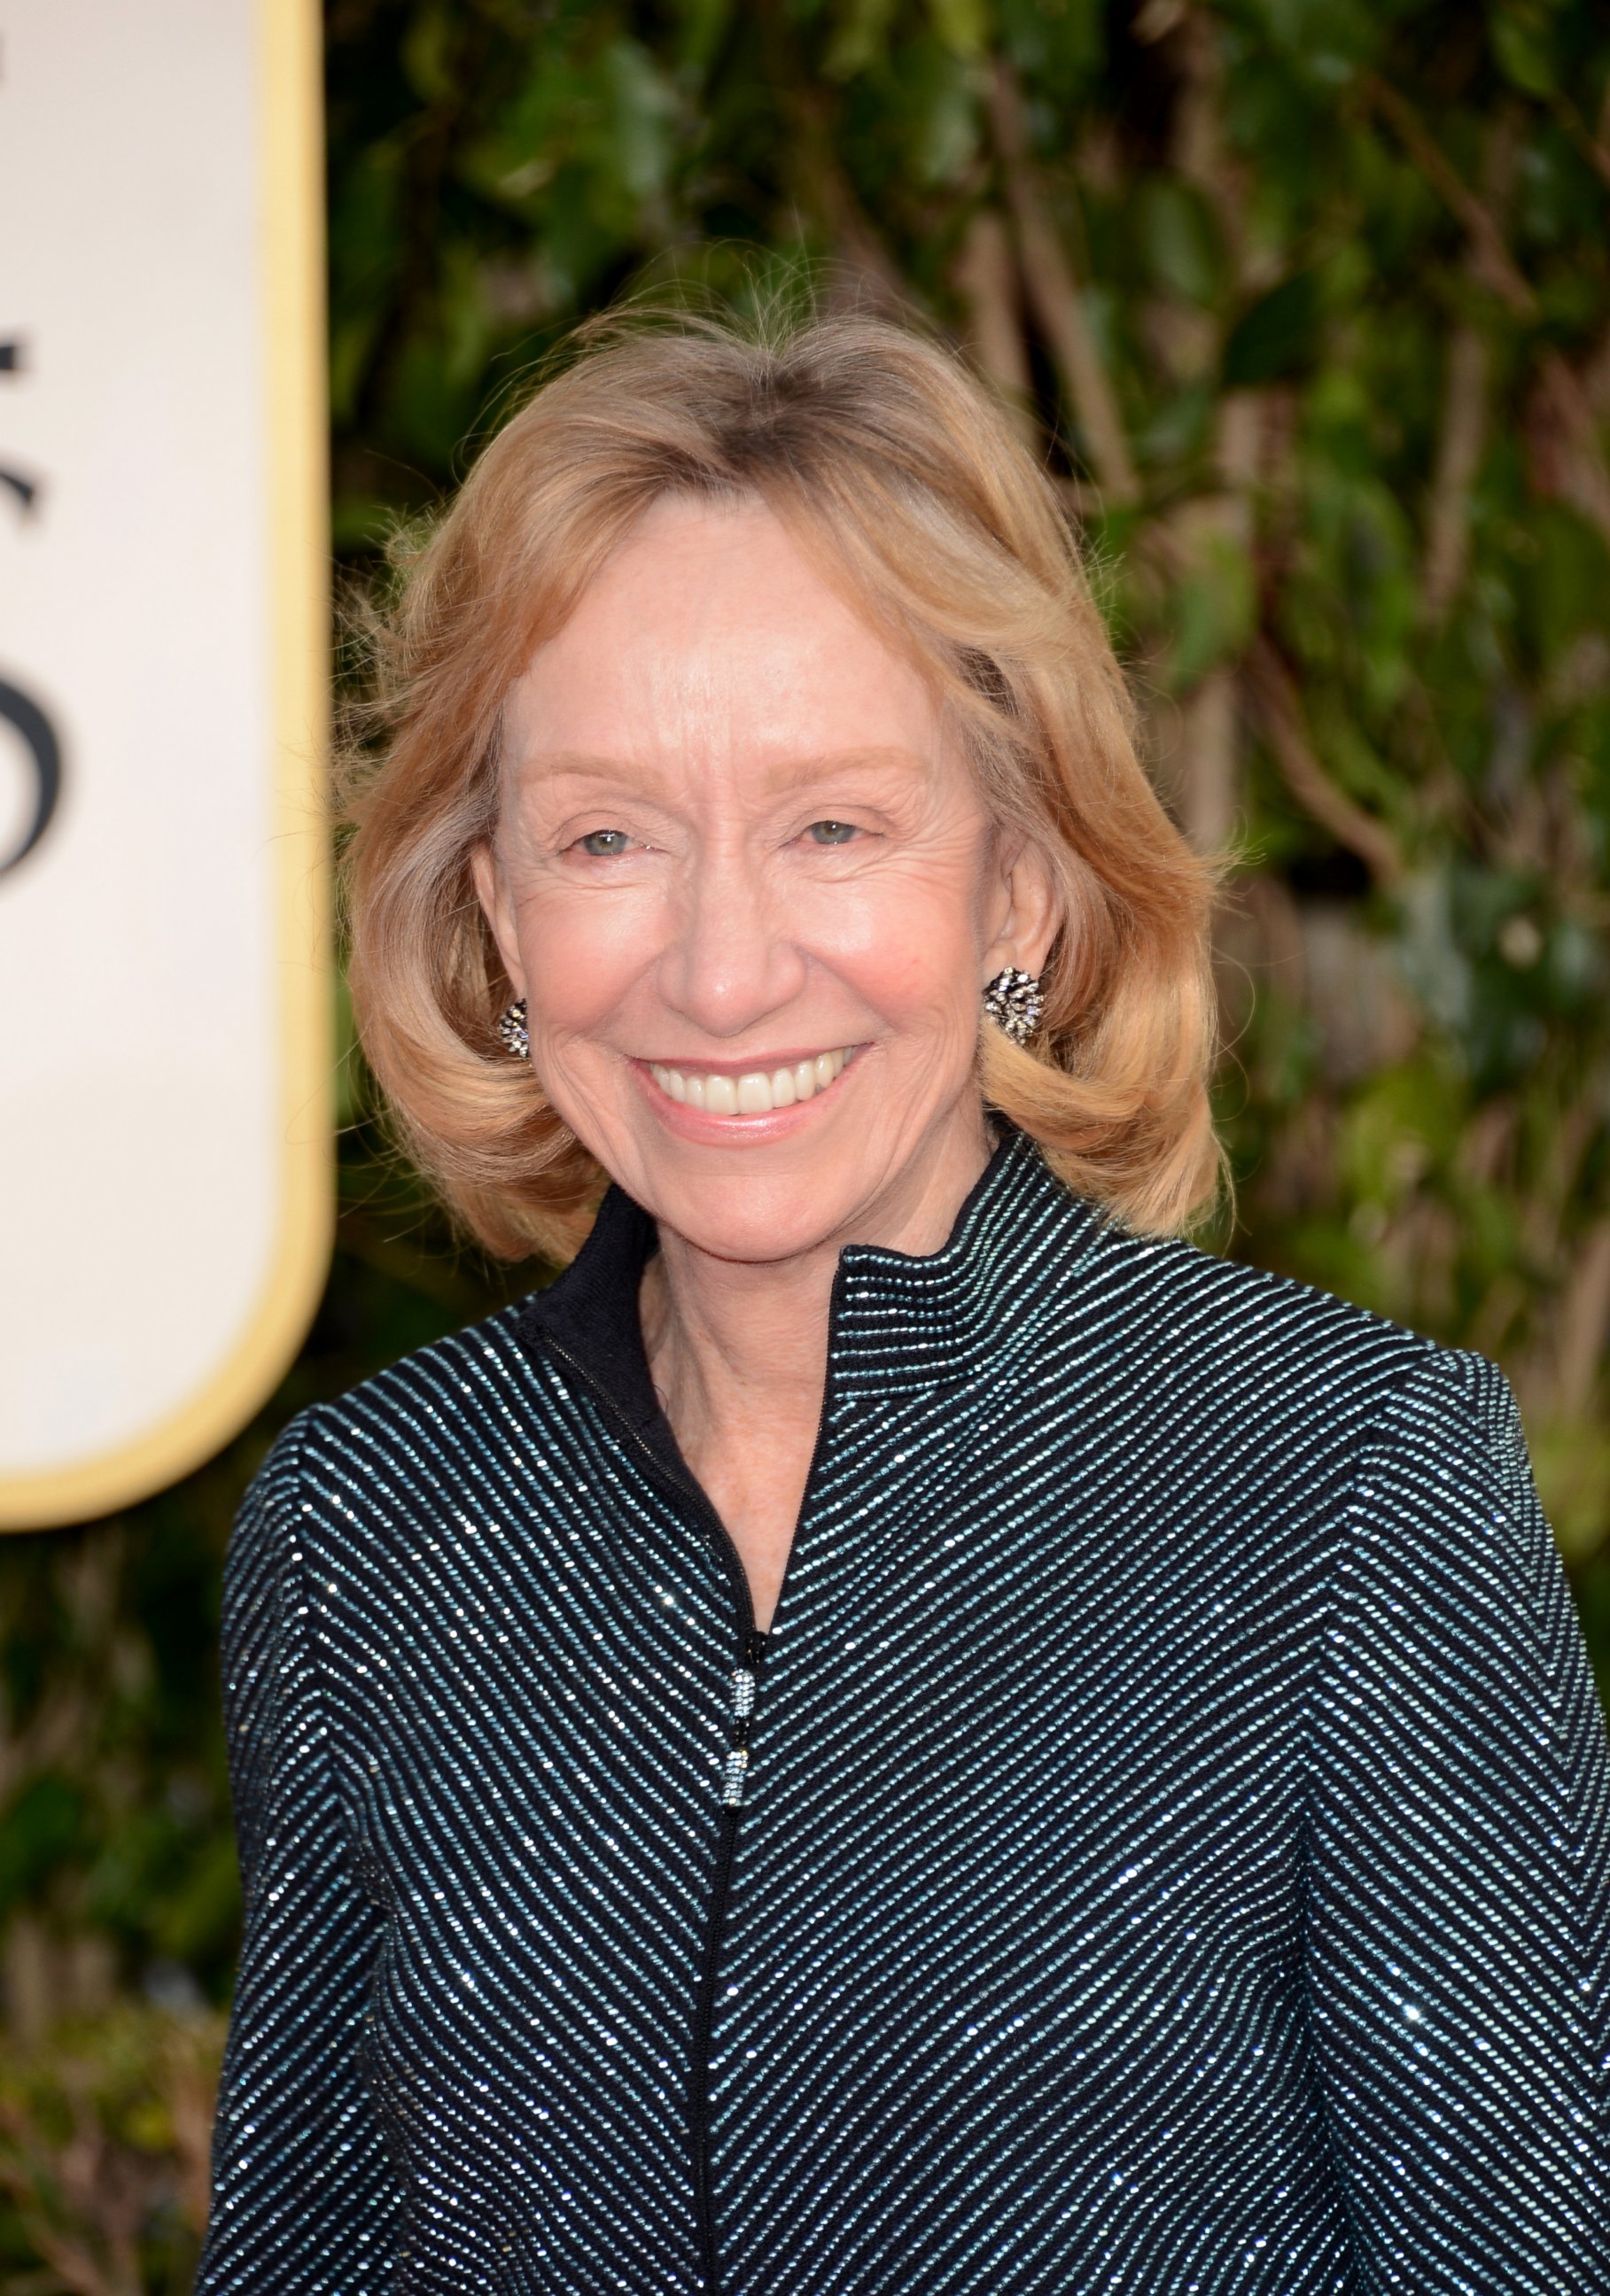 PHOTO: Writer Doris Kearns Goodwin arrives at the 70th Annual Golden Globe Awards held at The Beverly Hilton Hotel on Jan. 13, 2013 in Beverly Hills, Calif.